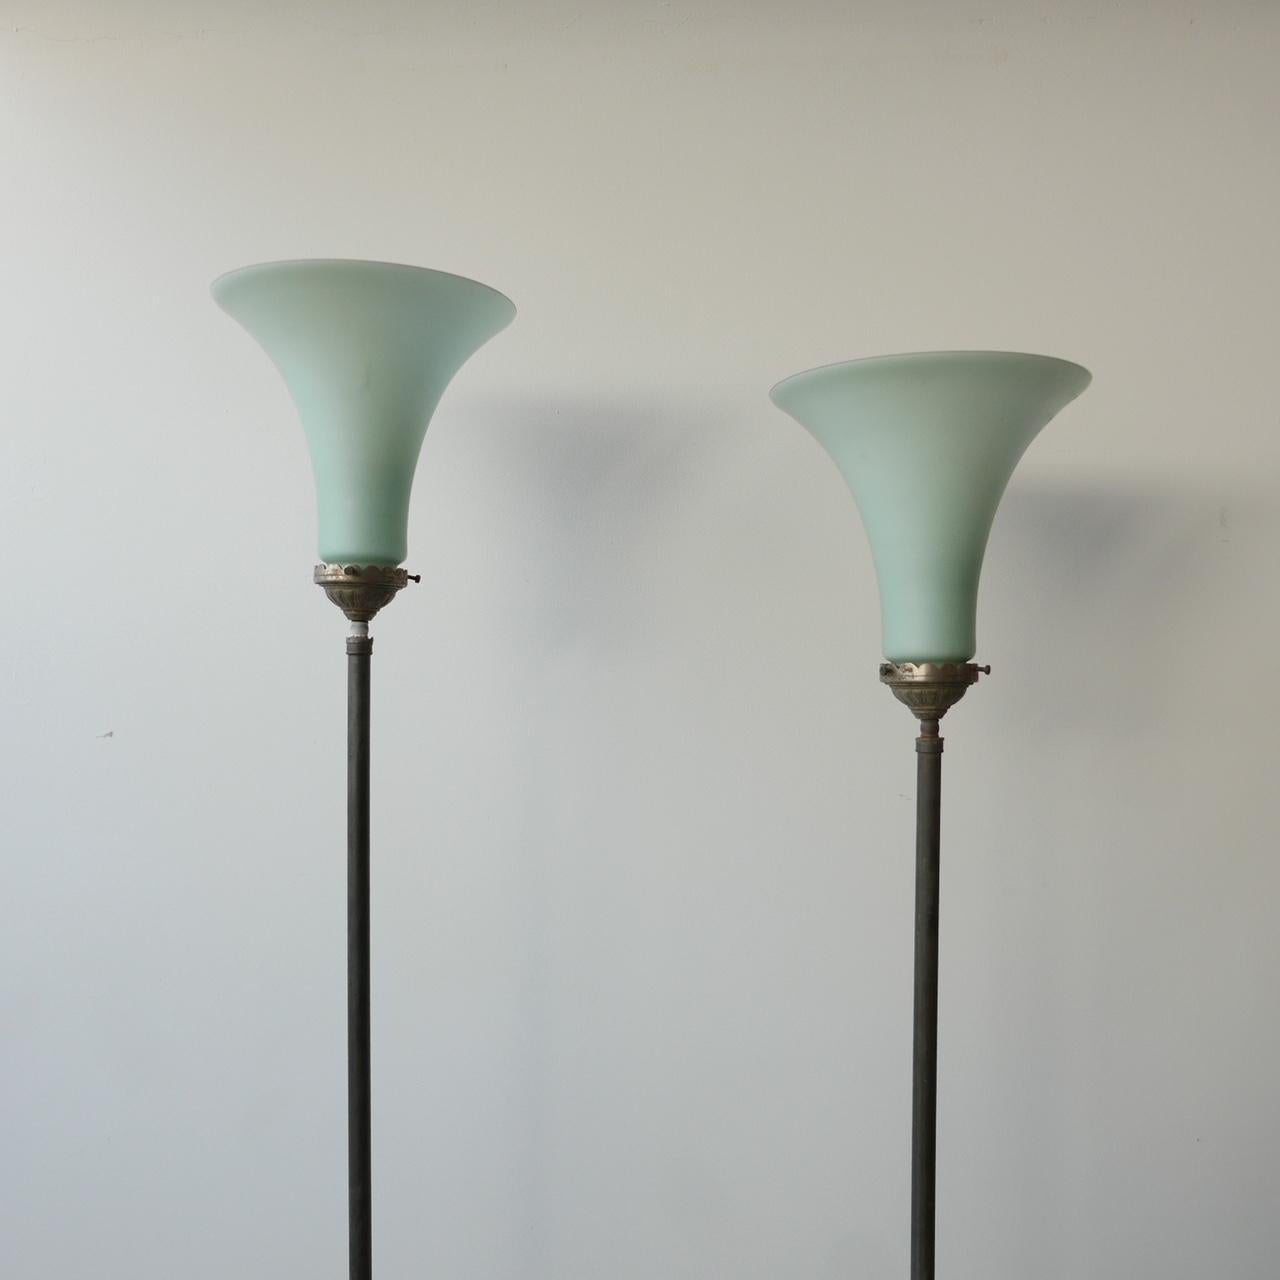 Antique Dutch Uplighter Glass Shade Floor Lamps '2' For Sale 4